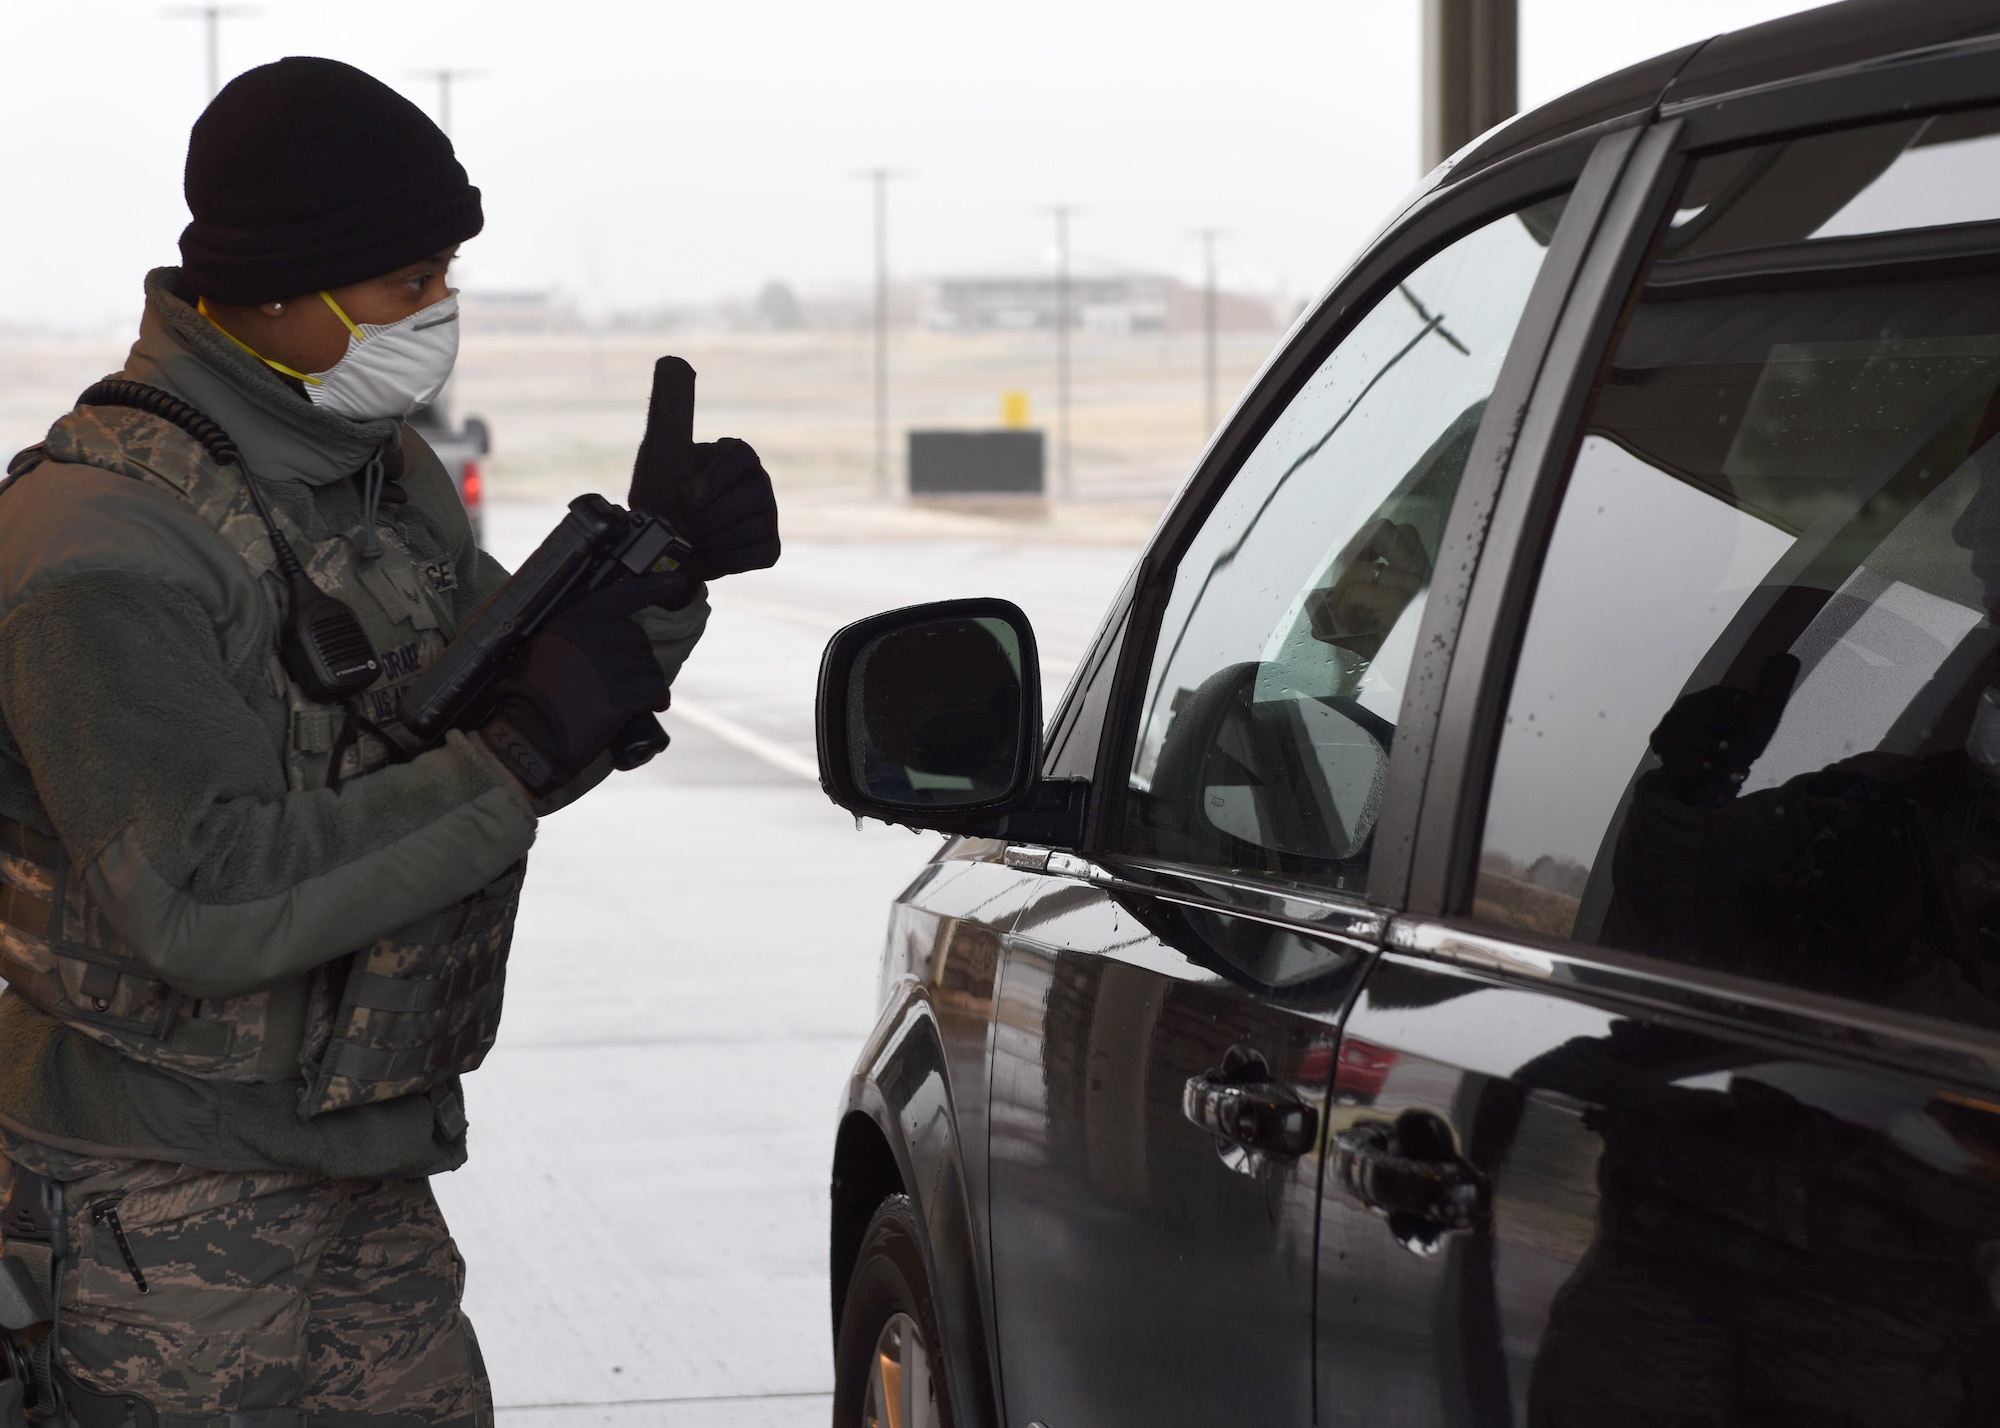 U.S. Air Force Airman 1st Class Laurente Drake, 460th Security Forces Squadron member, gives approval for a driver to proceed through the Mississippi Gate at Buckley Air Force Base, Colo., April 2, 2020. Buckley AFB is currently in Health Protection Condition level Charlie in response to the spread of COVID-19 in the state of Colorado. In efforts to reduce the amount of face-to-face interaction, identification cards are now visually inspected or scanned at a distance upon arrival to the gate unless absolutely required for security or privacy reasons. The HPCON Charlie defines base measures for a substantial disease threat and ensures Team Buckley is using the proper protocols and processes to prevent transmission. (U.S. Air Force photo by Airman 1st Class Haley N. Blevins)